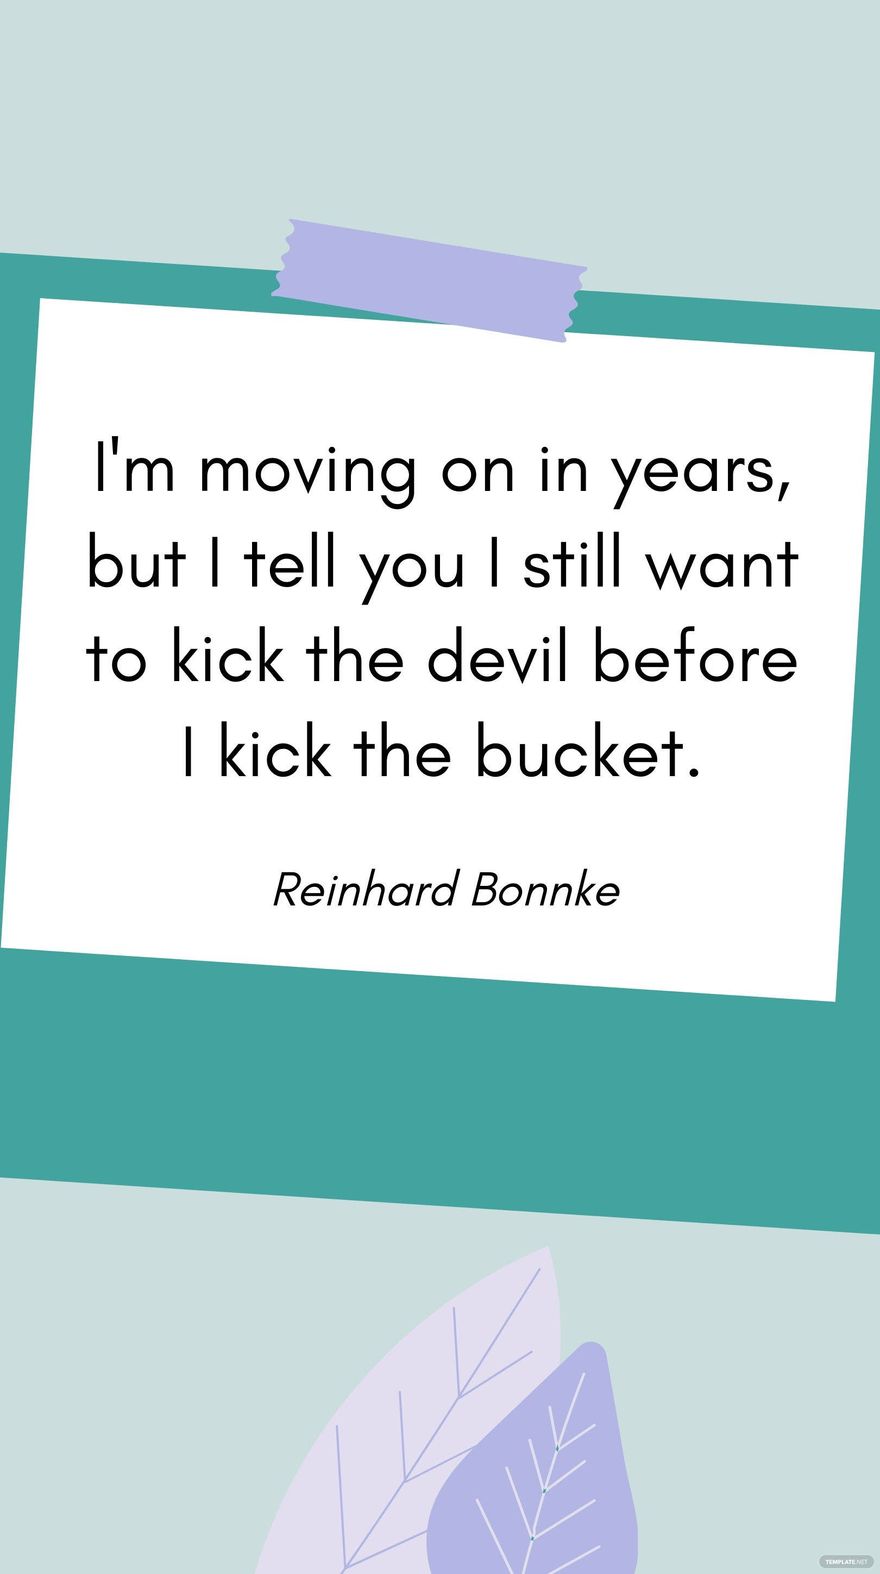 Reinhard Bonnke -I'm moving on in years, but I tell you I still want to kick the devil before I kick the bucket.